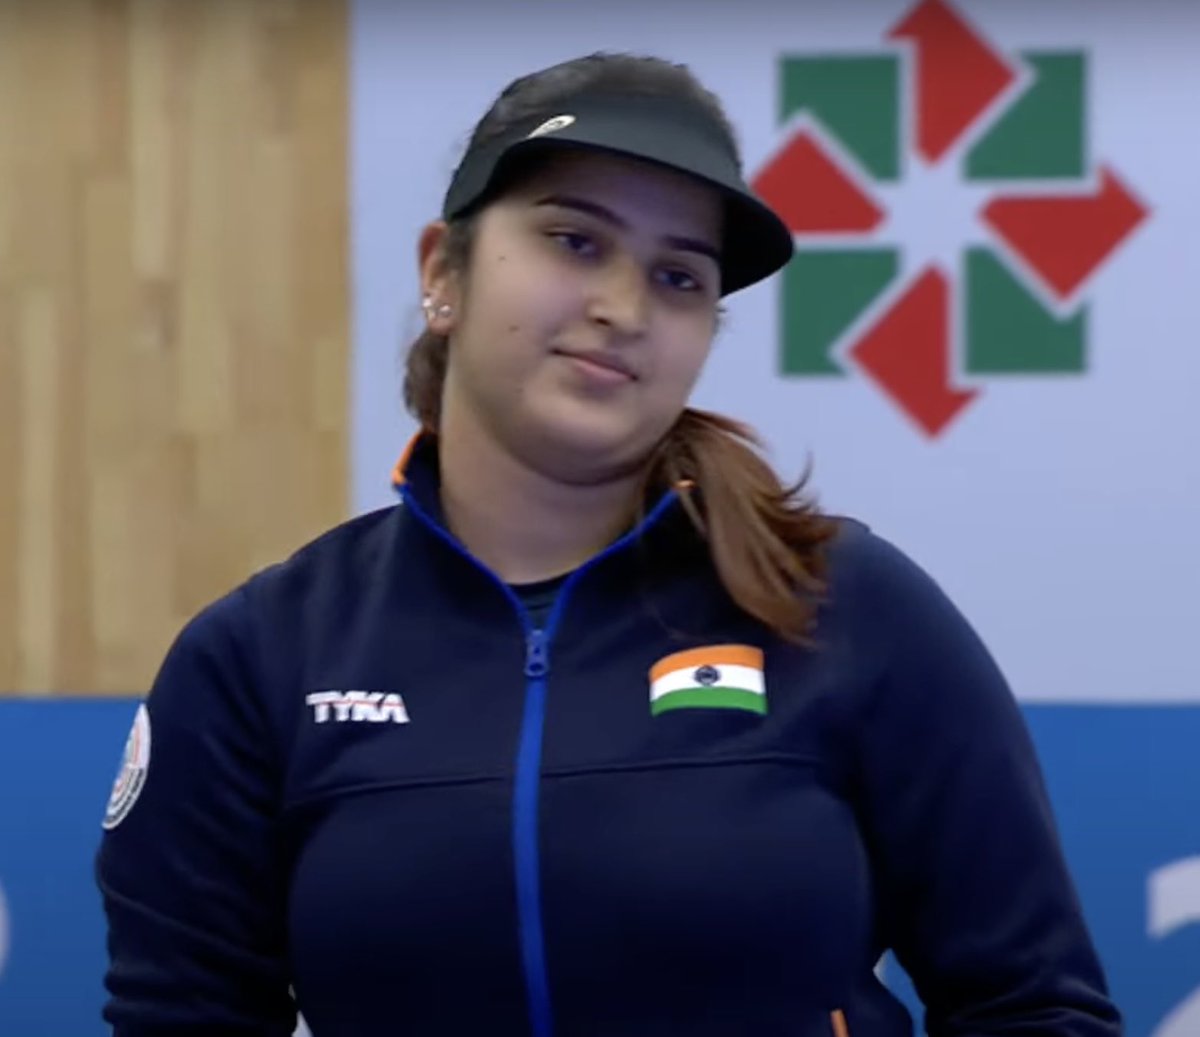 Incredible shooting by @SangwanRhythm as she seems to have smashed a 20-yr old #worldrecord with a score of 595 to top the women’s 25m pistol 🔫 qualifiers.
@Media_SAI @DeoKalikesh

#Shooting #ISSFWorldCup #Rifle #Pistol #Baku #TeamIndia #IndiaShooting #ShootingSport #India